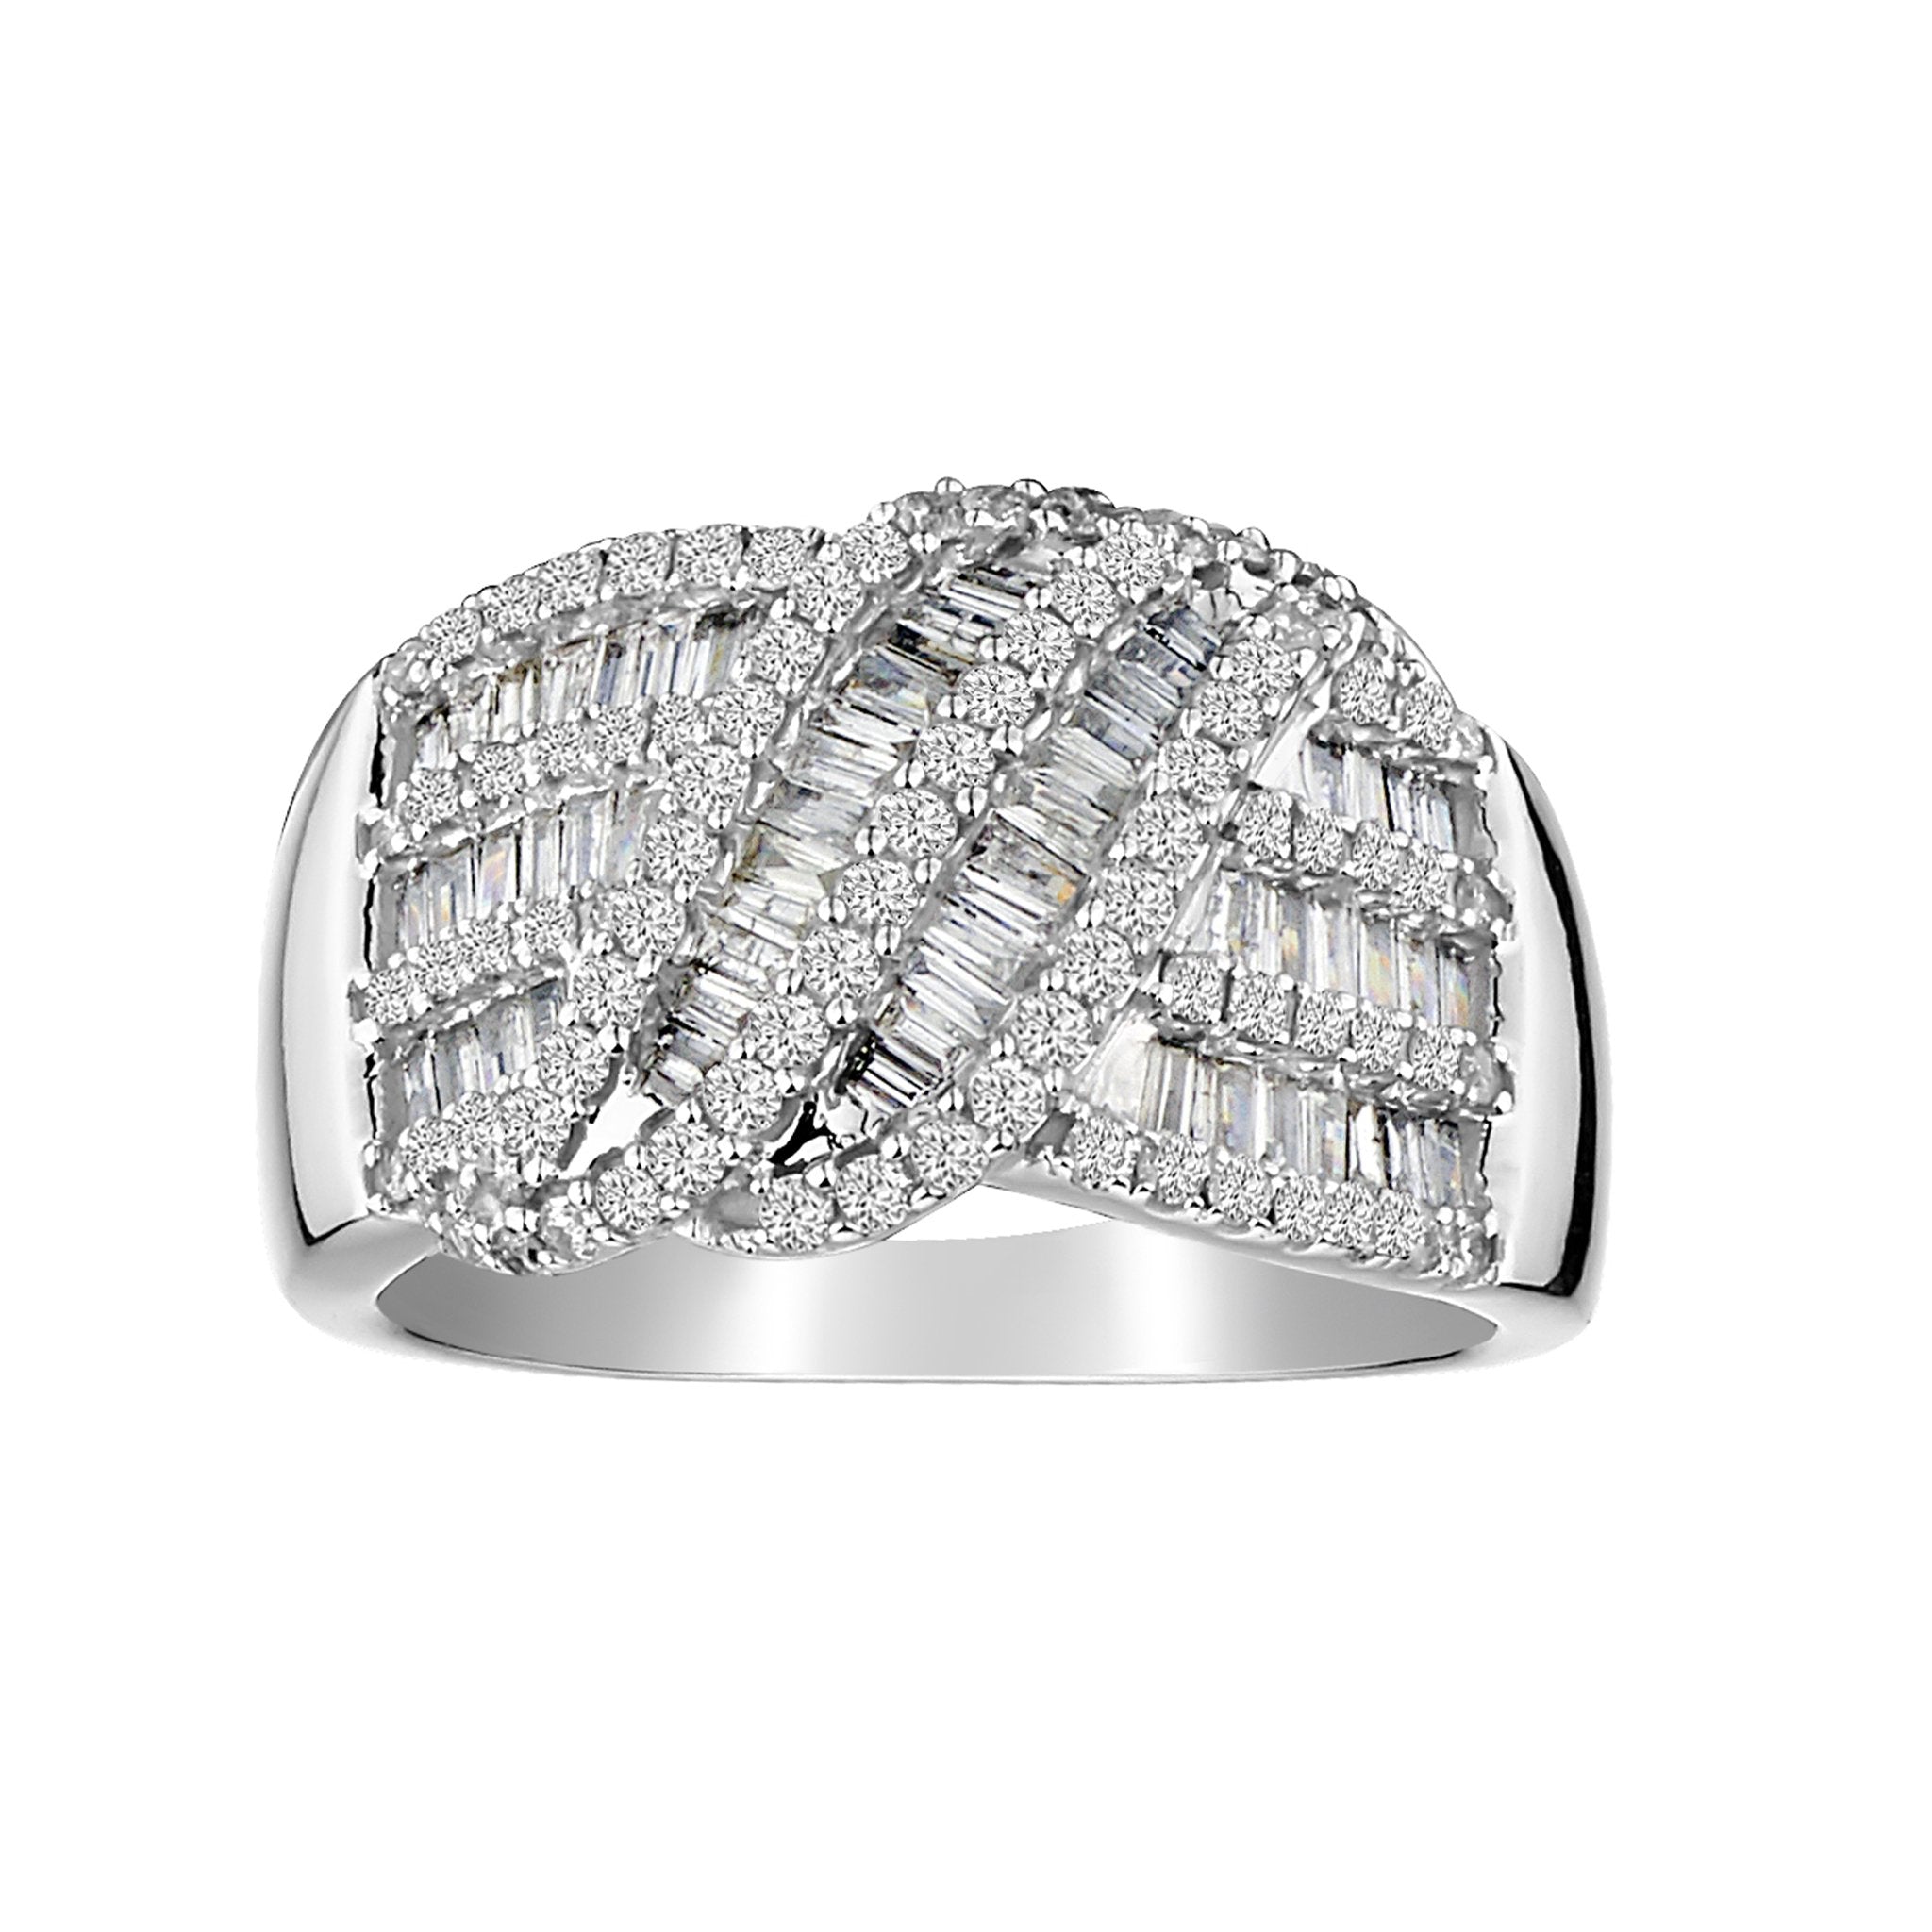 1.00 Carat Diamond Ring,  10kt White Gold. Fashion Rings. Griffin Jewellery Designs